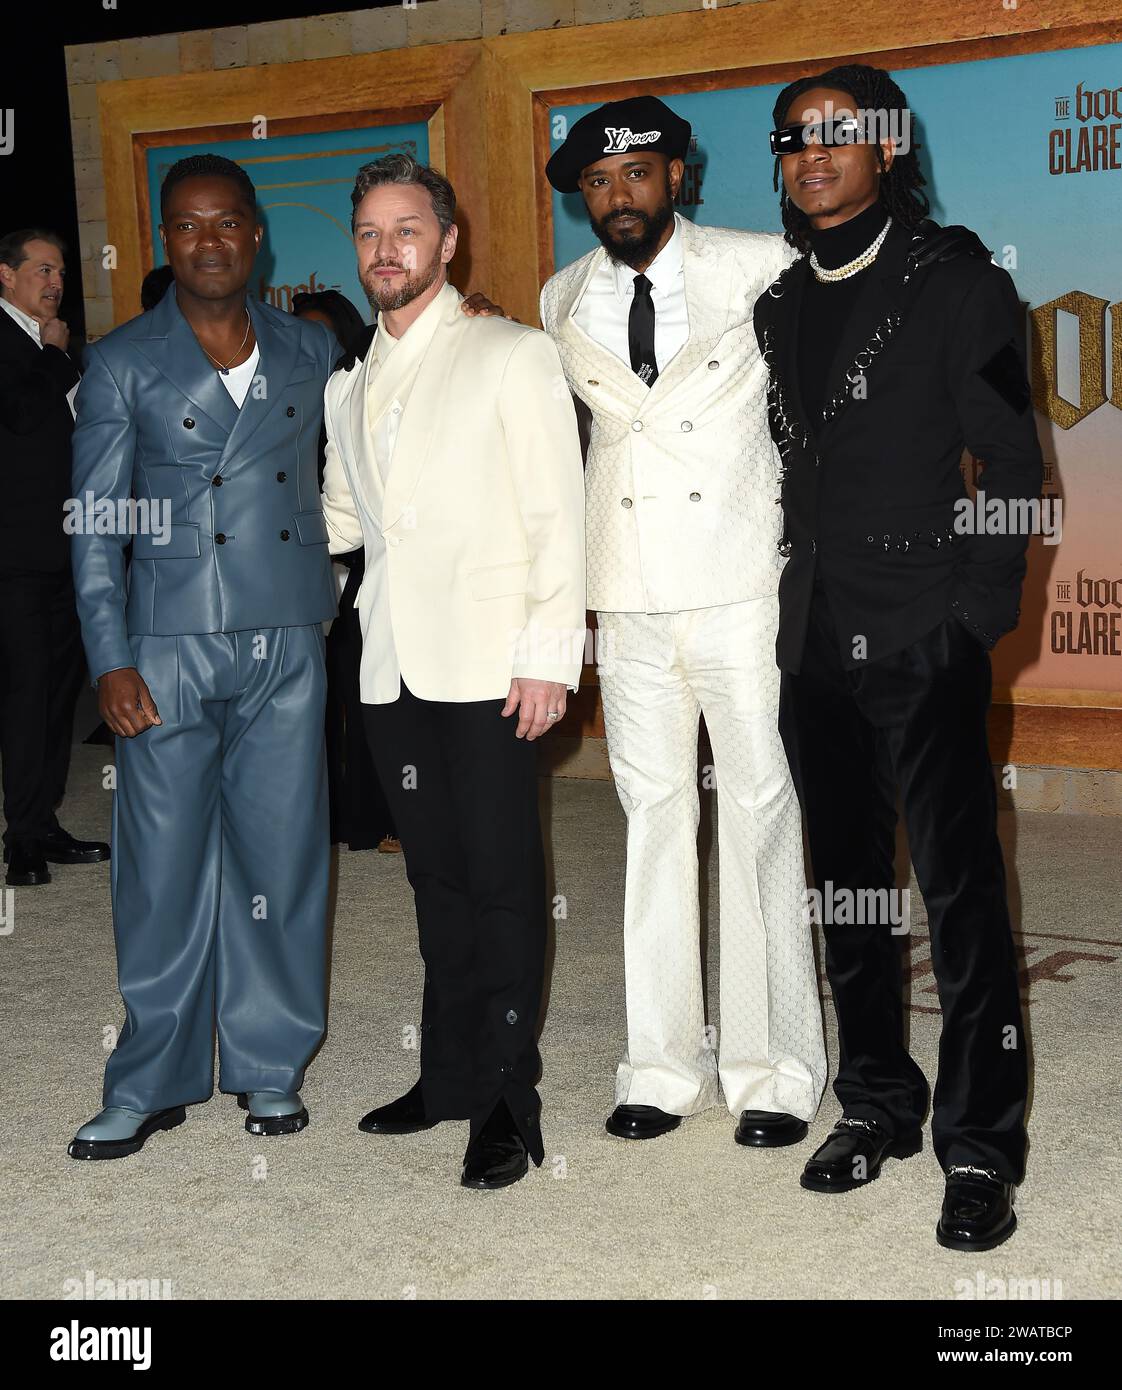 Los Angeles, USA. 05th Jan, 2024. David Oyelowo, James McAvoy, LaKeith Stanfield, RJ Cyler arriving to Sony's “The Book of Clarence” Los Angeles premiere held at the Academy Museum of Motion Pictures in Los Angeles, CA. on November 29, 2023. © Majil/ Credit: AFF/Alamy Live News Stock Photo